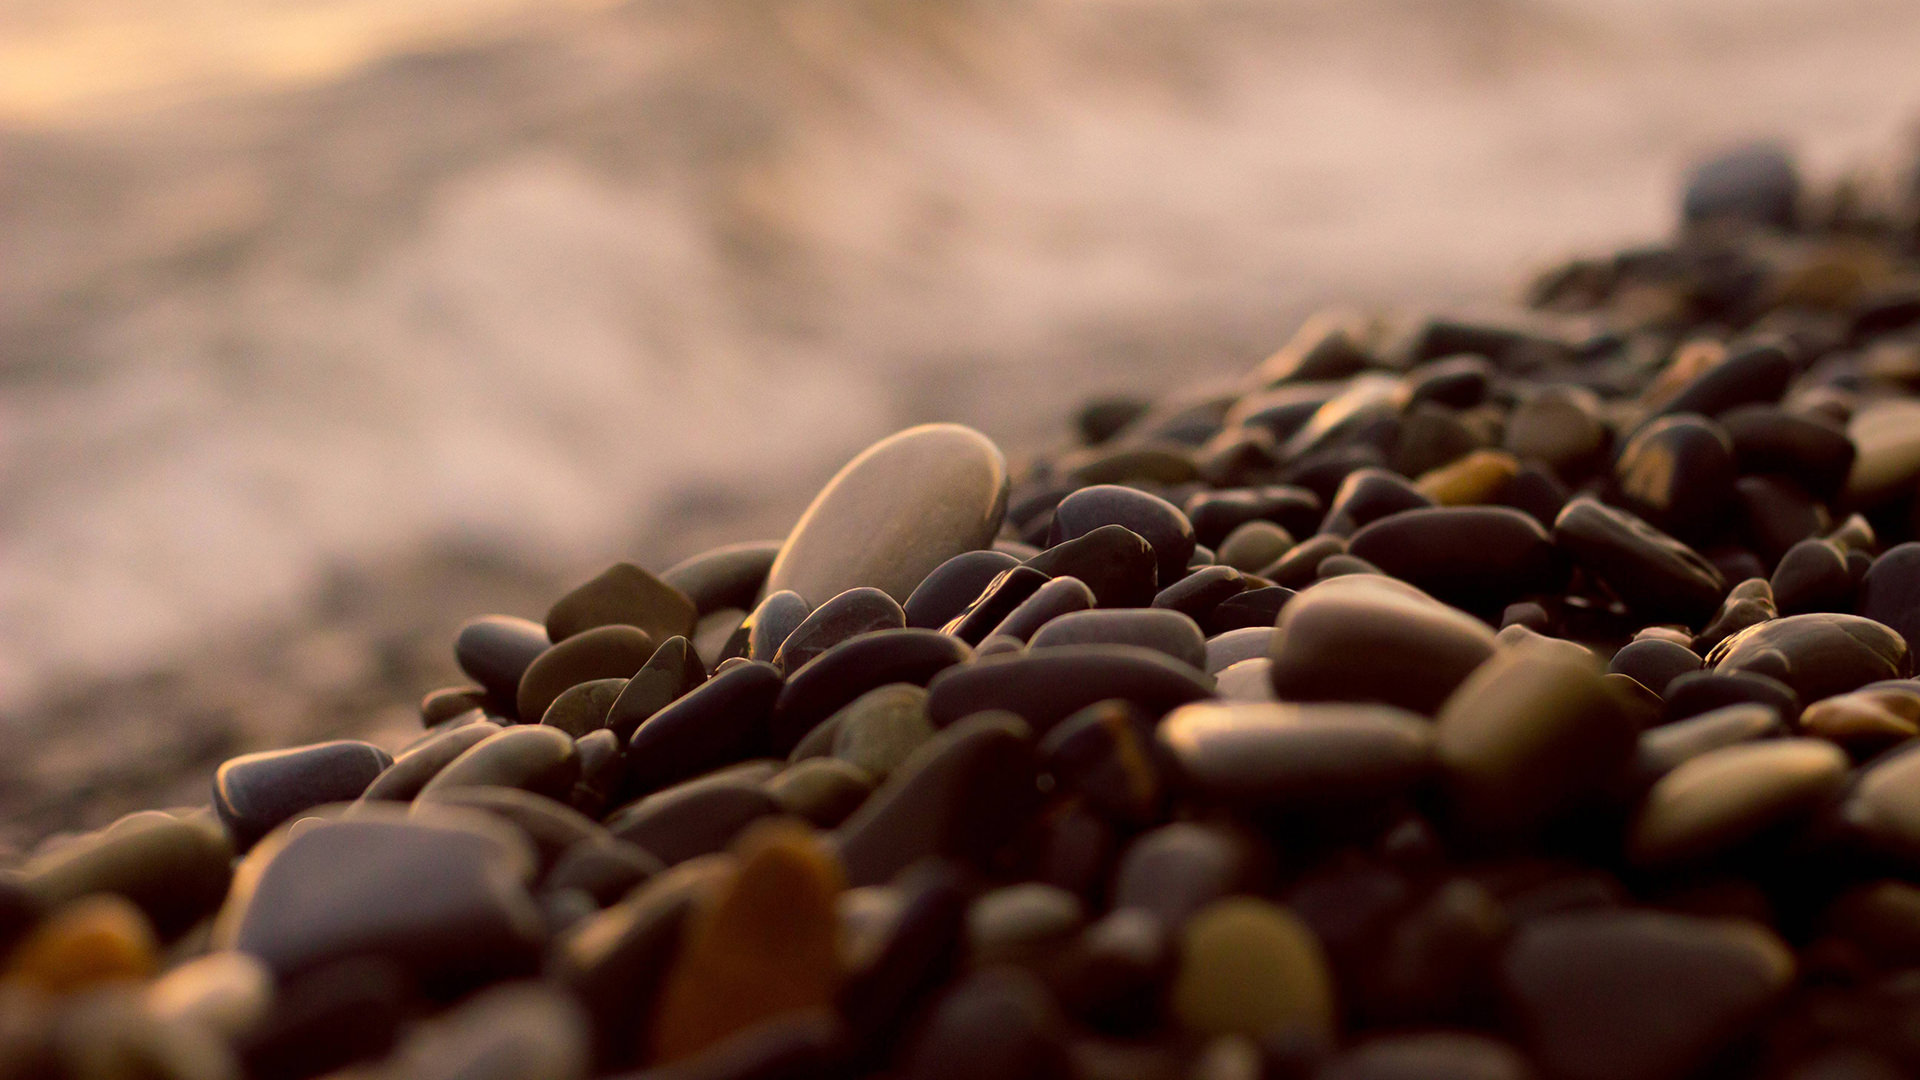 General 1920x1080 nature brown photography blurred pebbles natural light beach stones